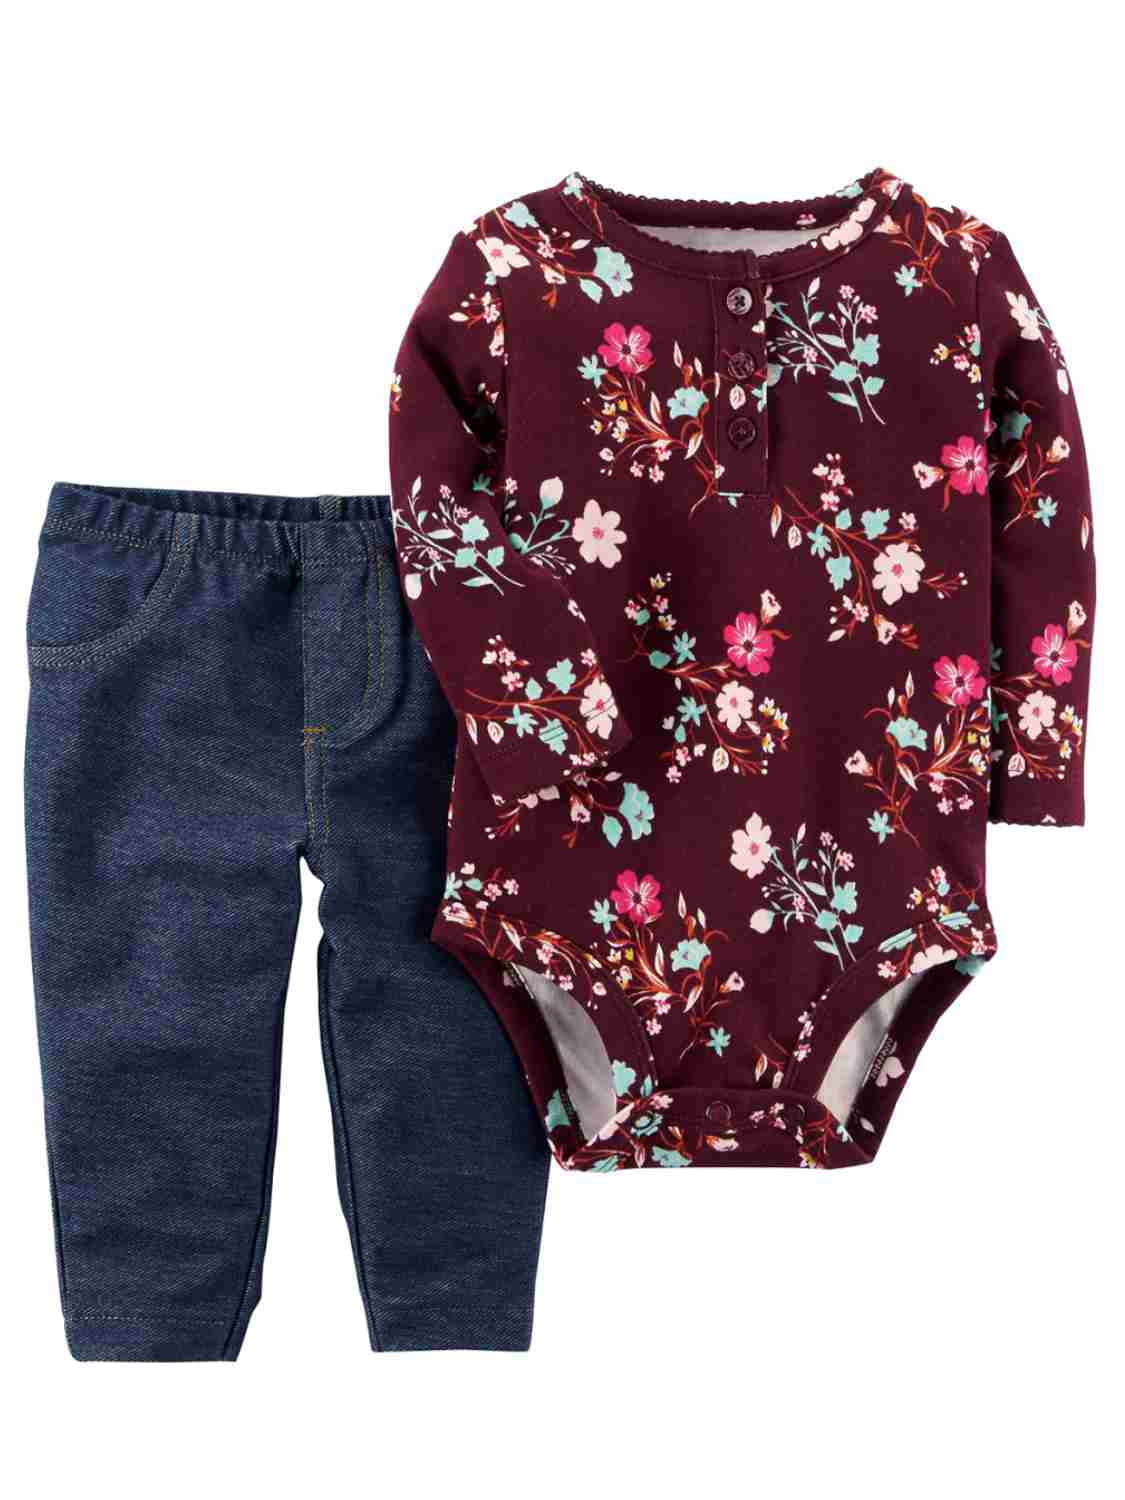 maroon baby outfit